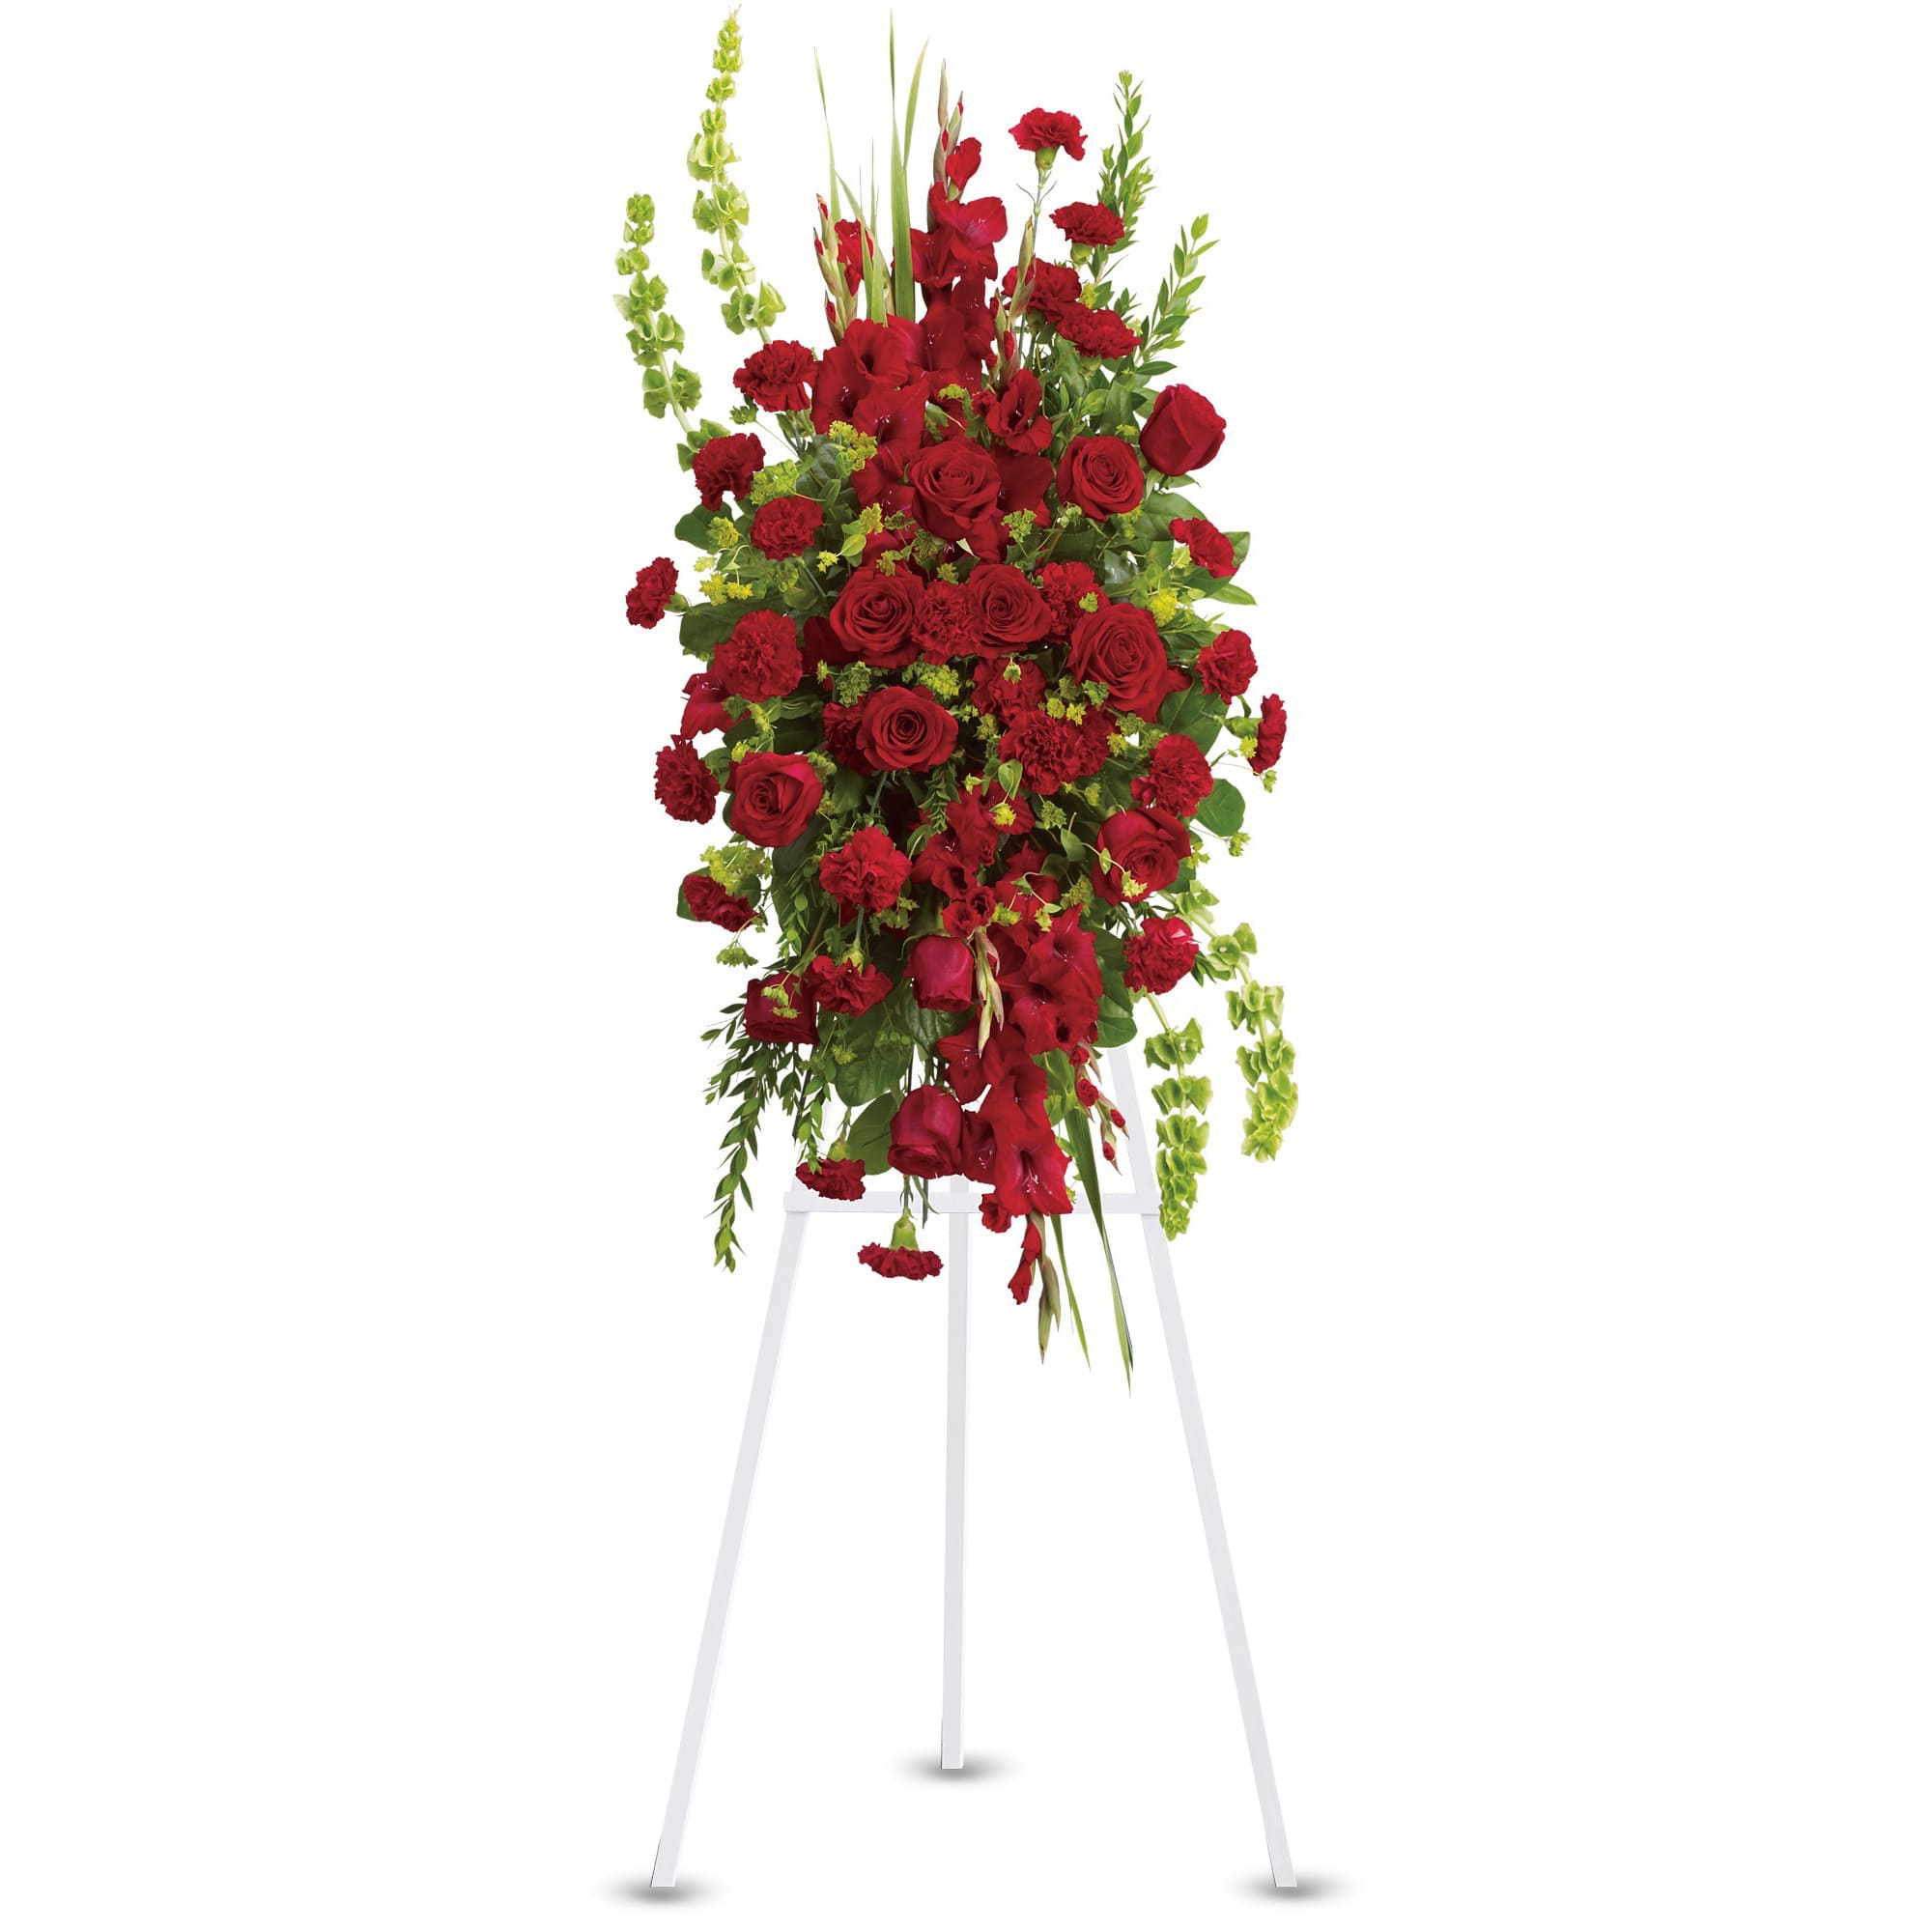 Care and Compassion Spray by Teleflora T230-1A - Your care and compassion will be appreciated by all who lay eyes on this radiant standing spray. A variety of lovely vibrant red blossoms contrasted by vivid green of bells of Ireland will deliver your heartfelt condolences. Perfectly. 